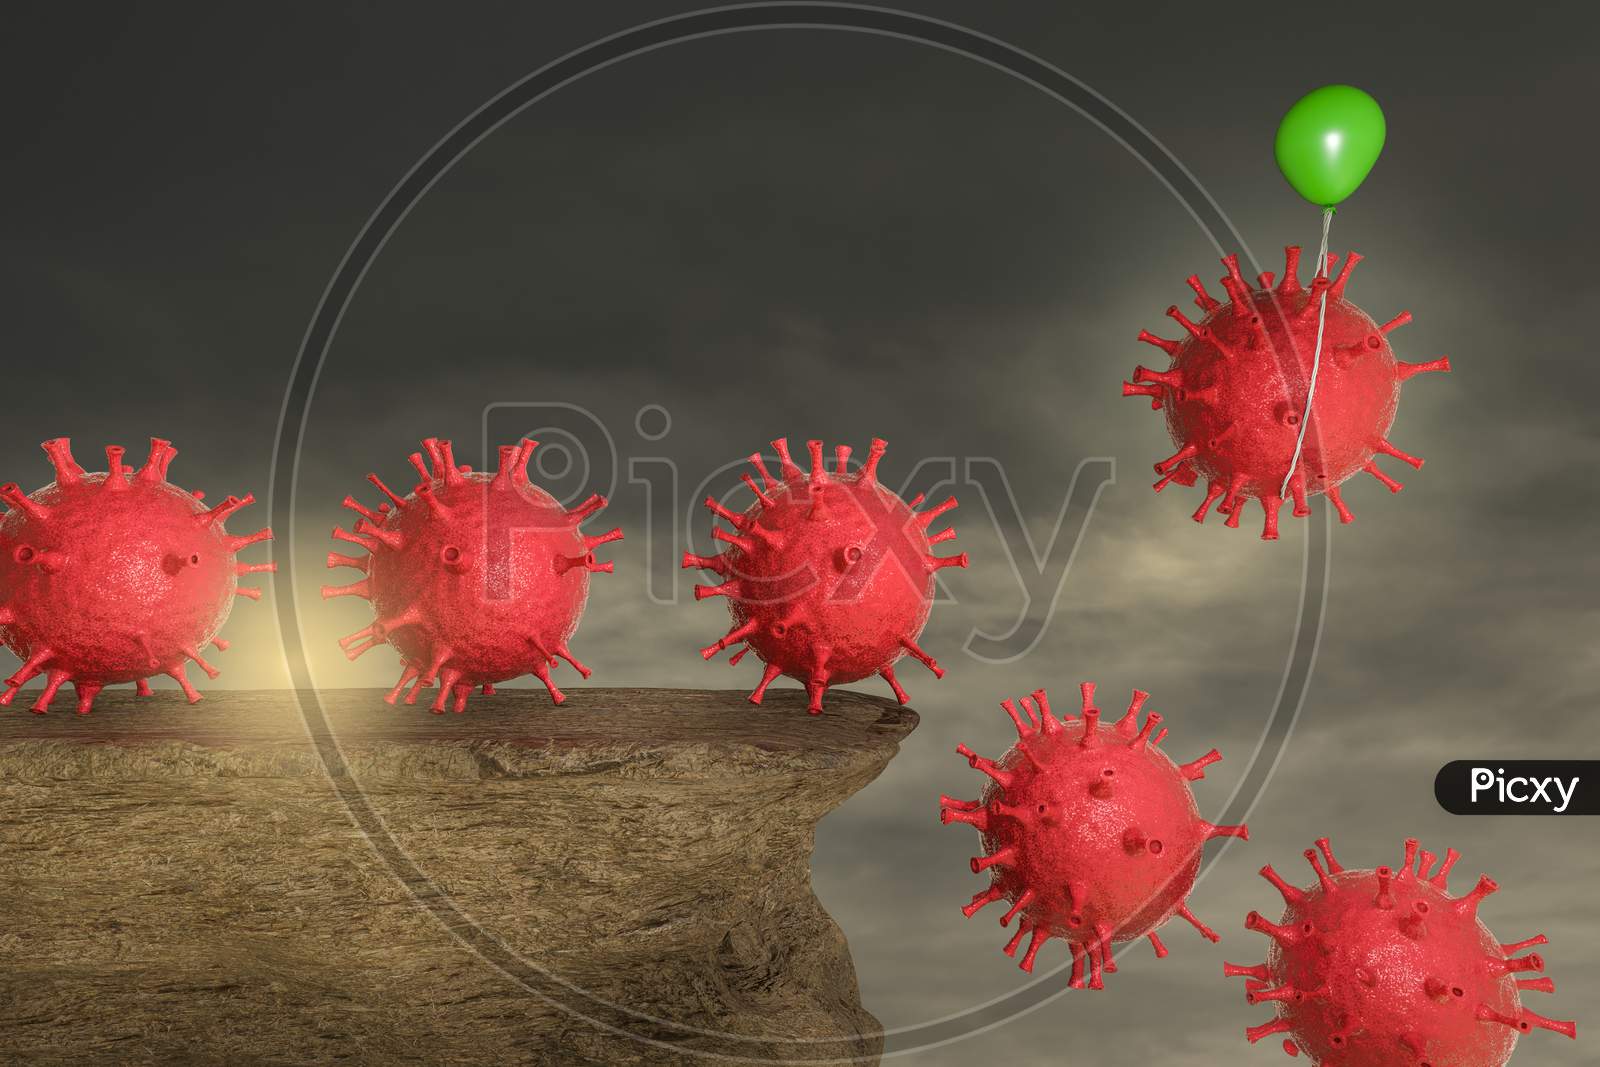 Coronavirus Influenza On A Stone Cliff With A Green Balloon Help To Escape One Coronavirus From Falling In A Sunset Day. Protection Against ''2019-Ncov'' Or Infectious Epidemic Concept. 3D Render